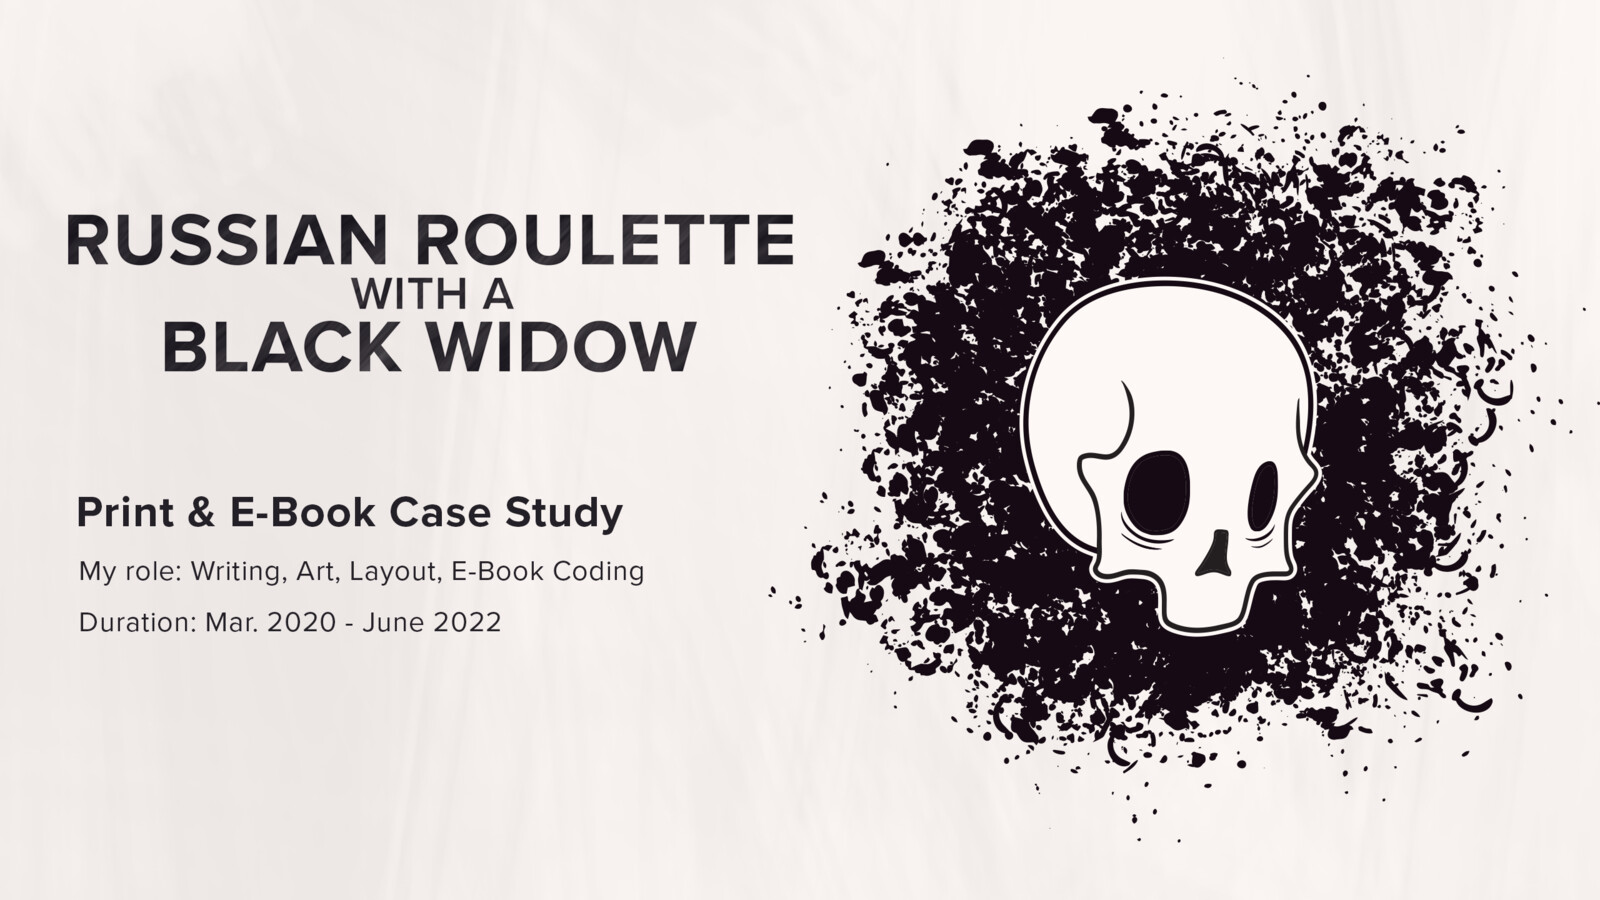 Russian Roulette with a Black Widow Case Study